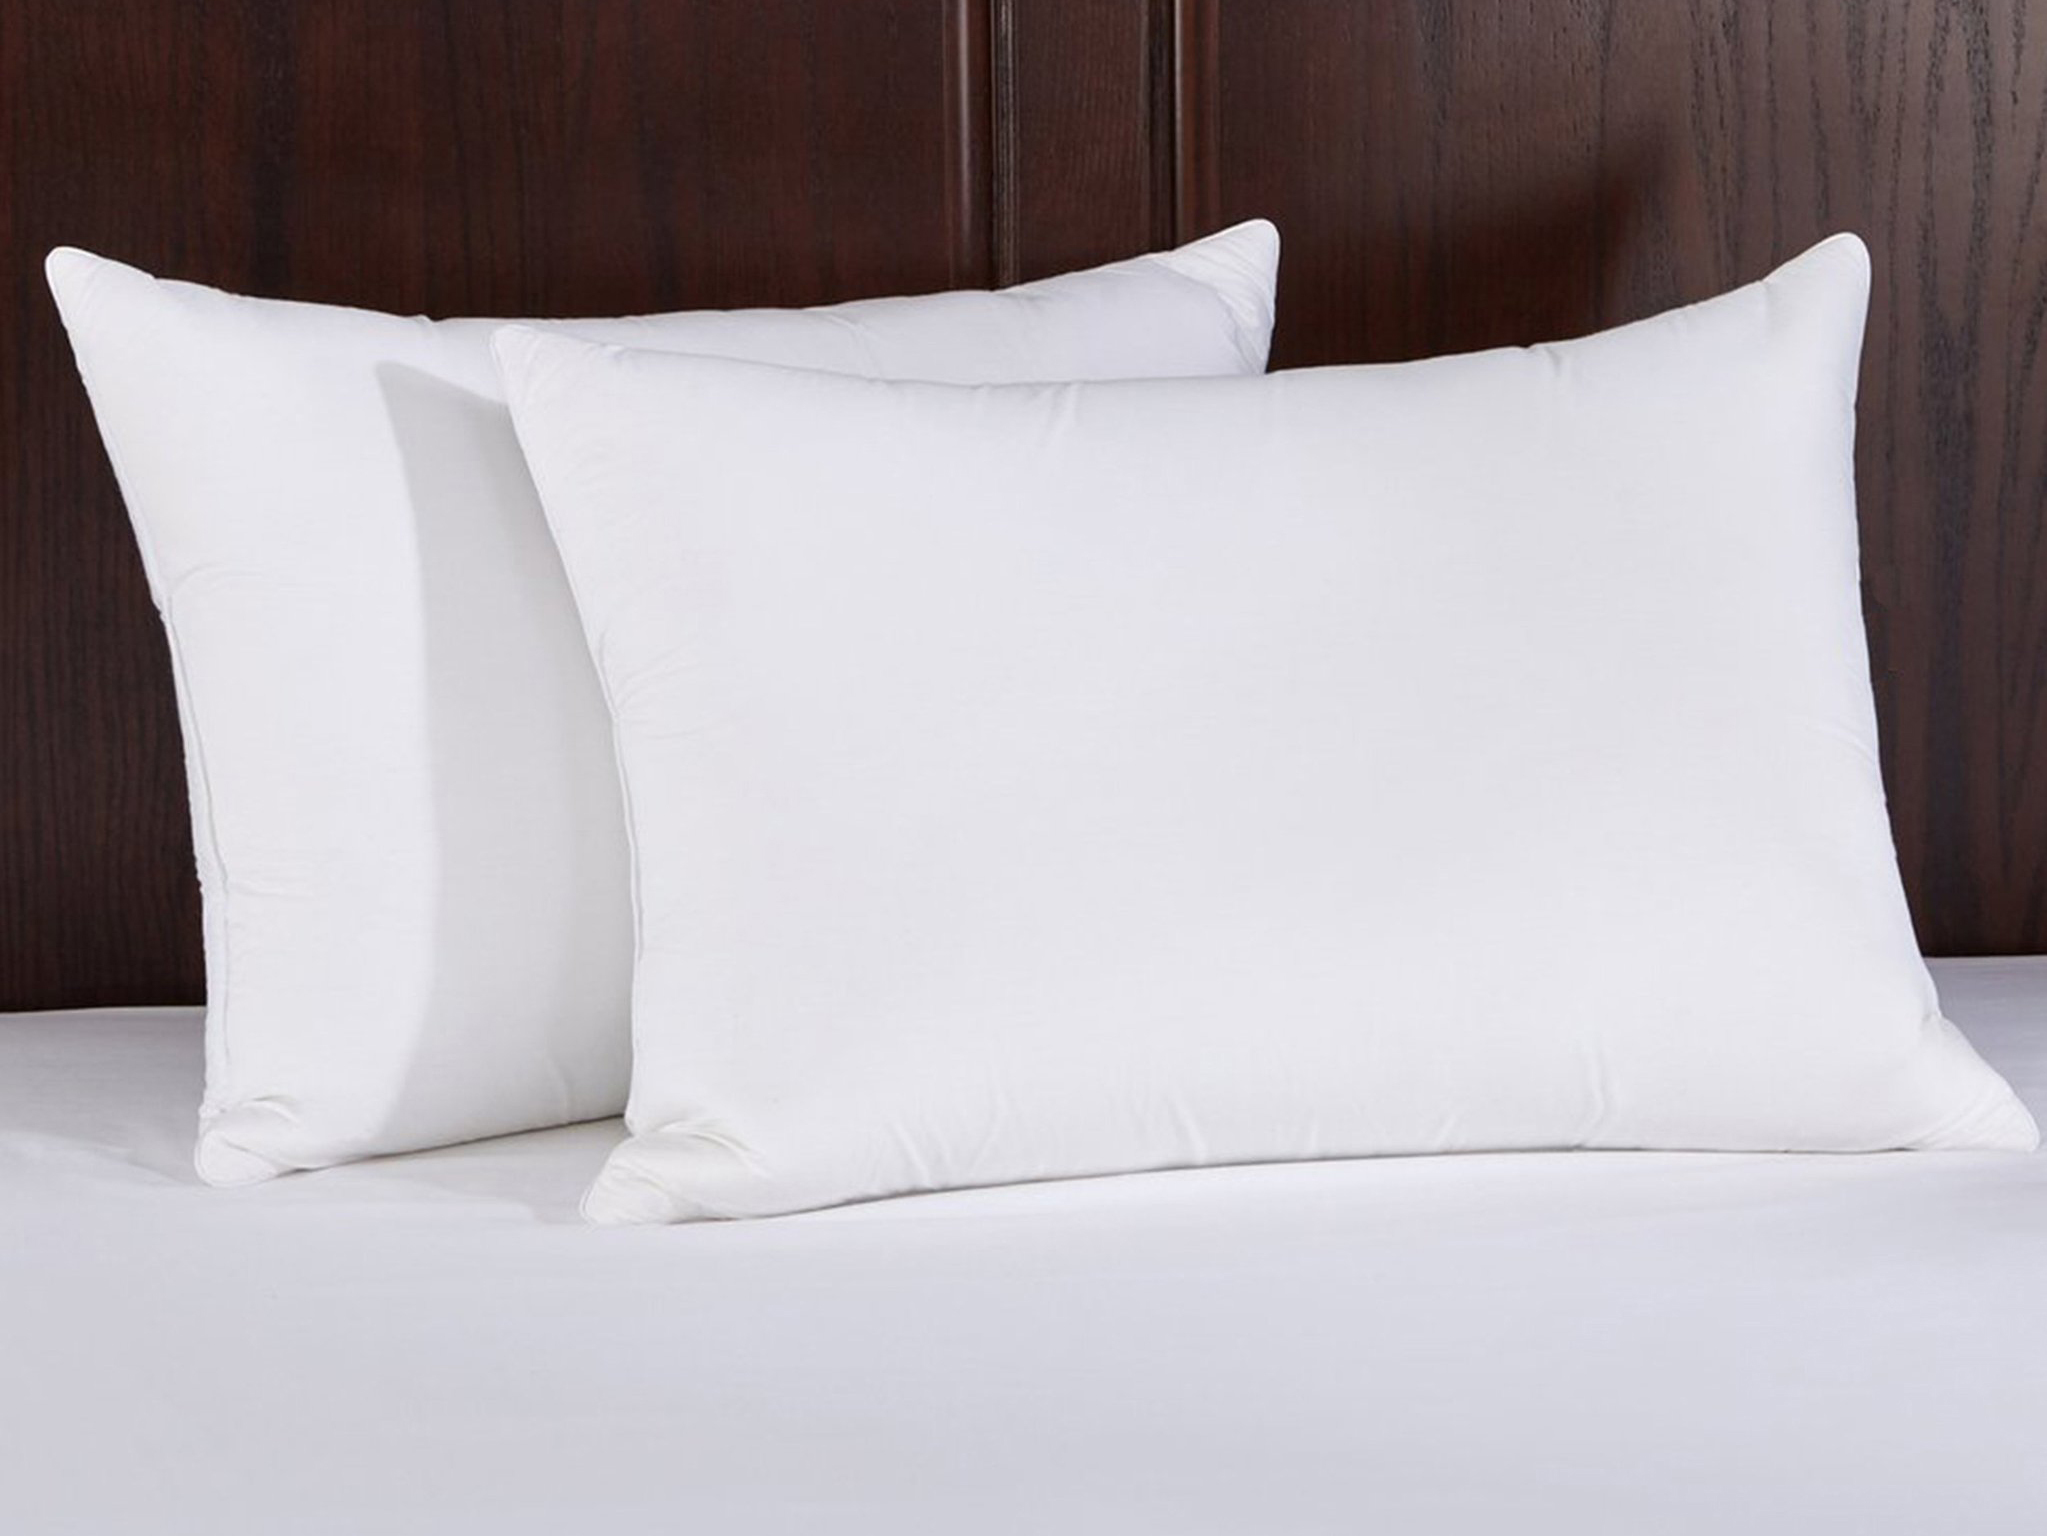 Millano Everyday Pillow Protector-2 Pack